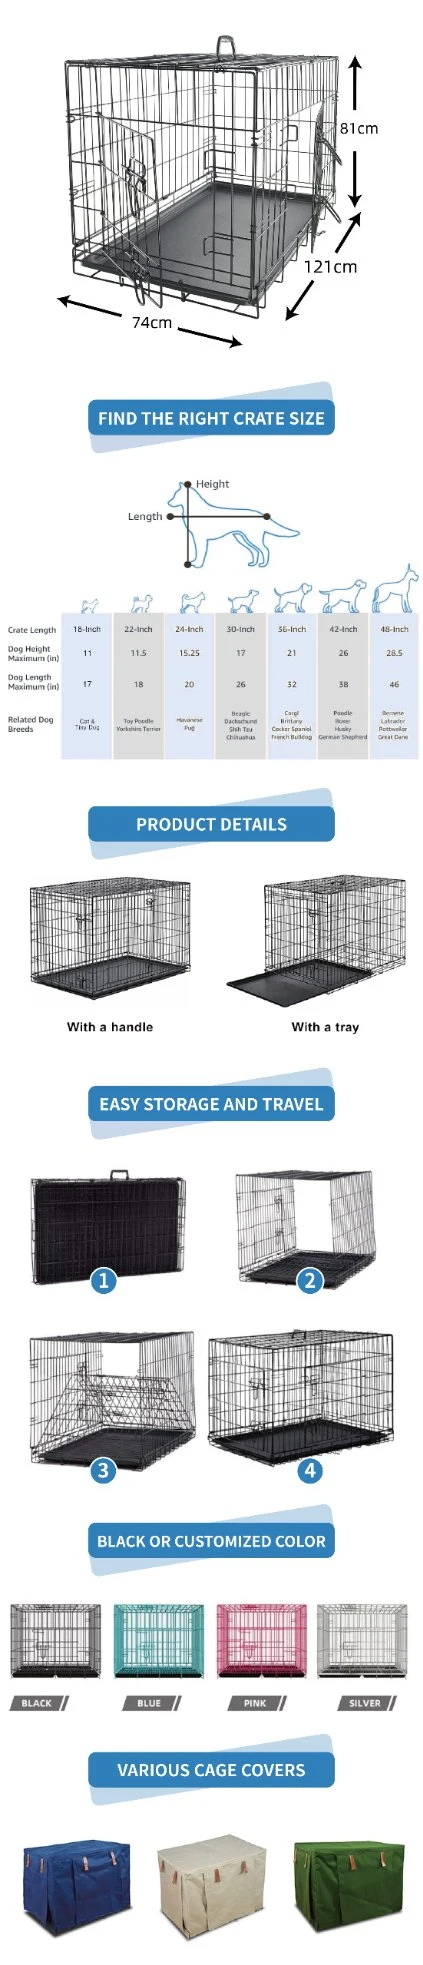 Embrace Perfection with Our Exquisite 48-Inch Single Door Metal Folding Dog Crate